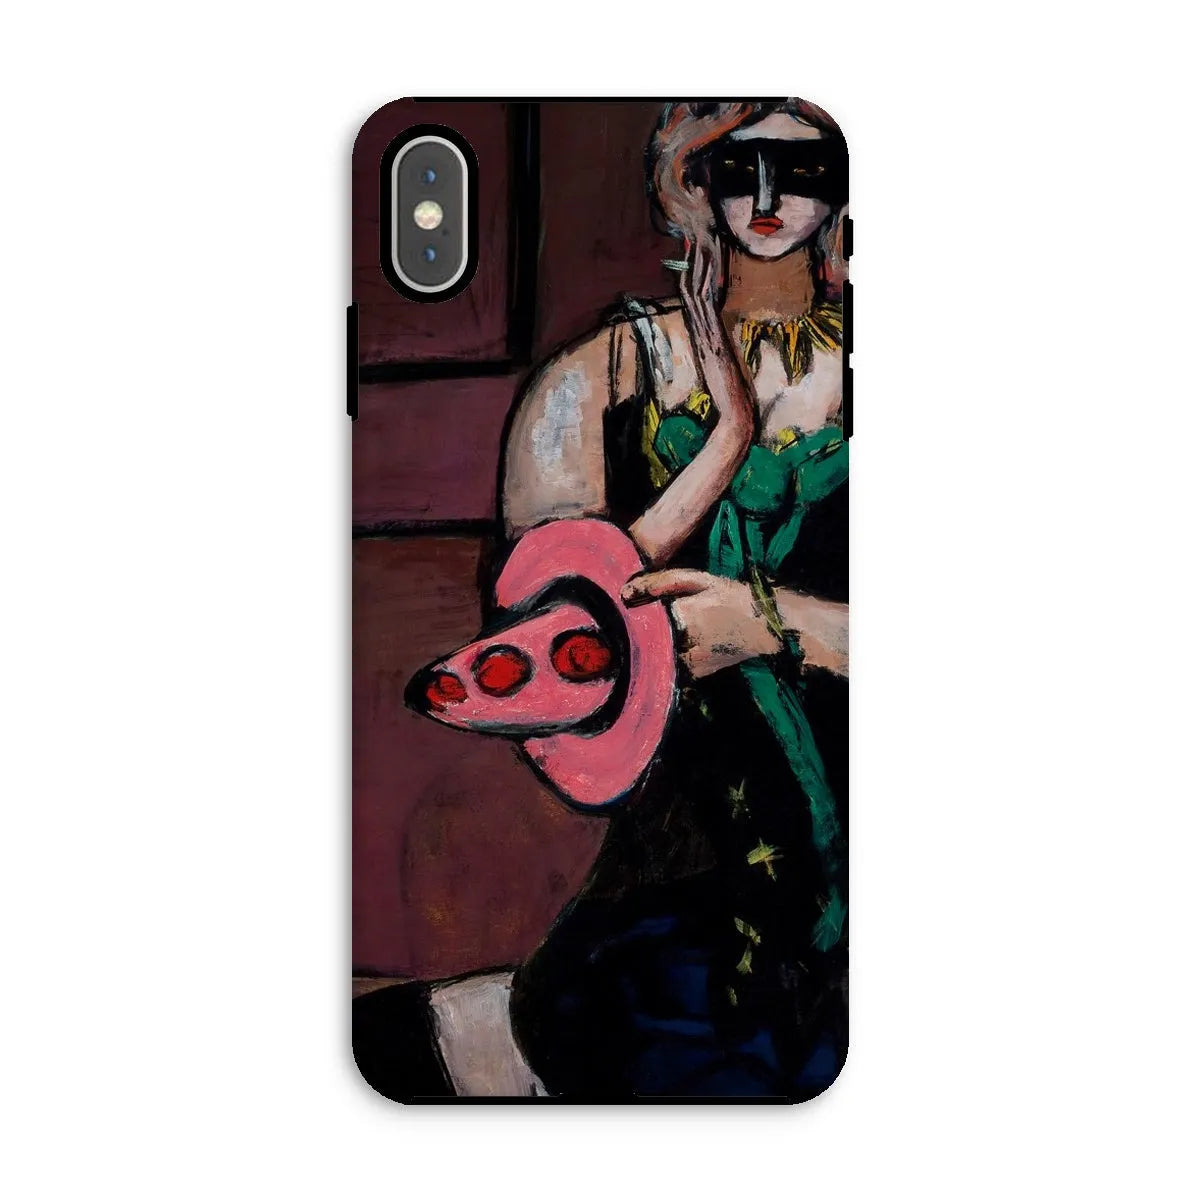 Carnival Mask - German Art Phone Case - Max Beckmann - Iphone Xs Max / Matte - Mobile Phone Cases - Aesthetic Art